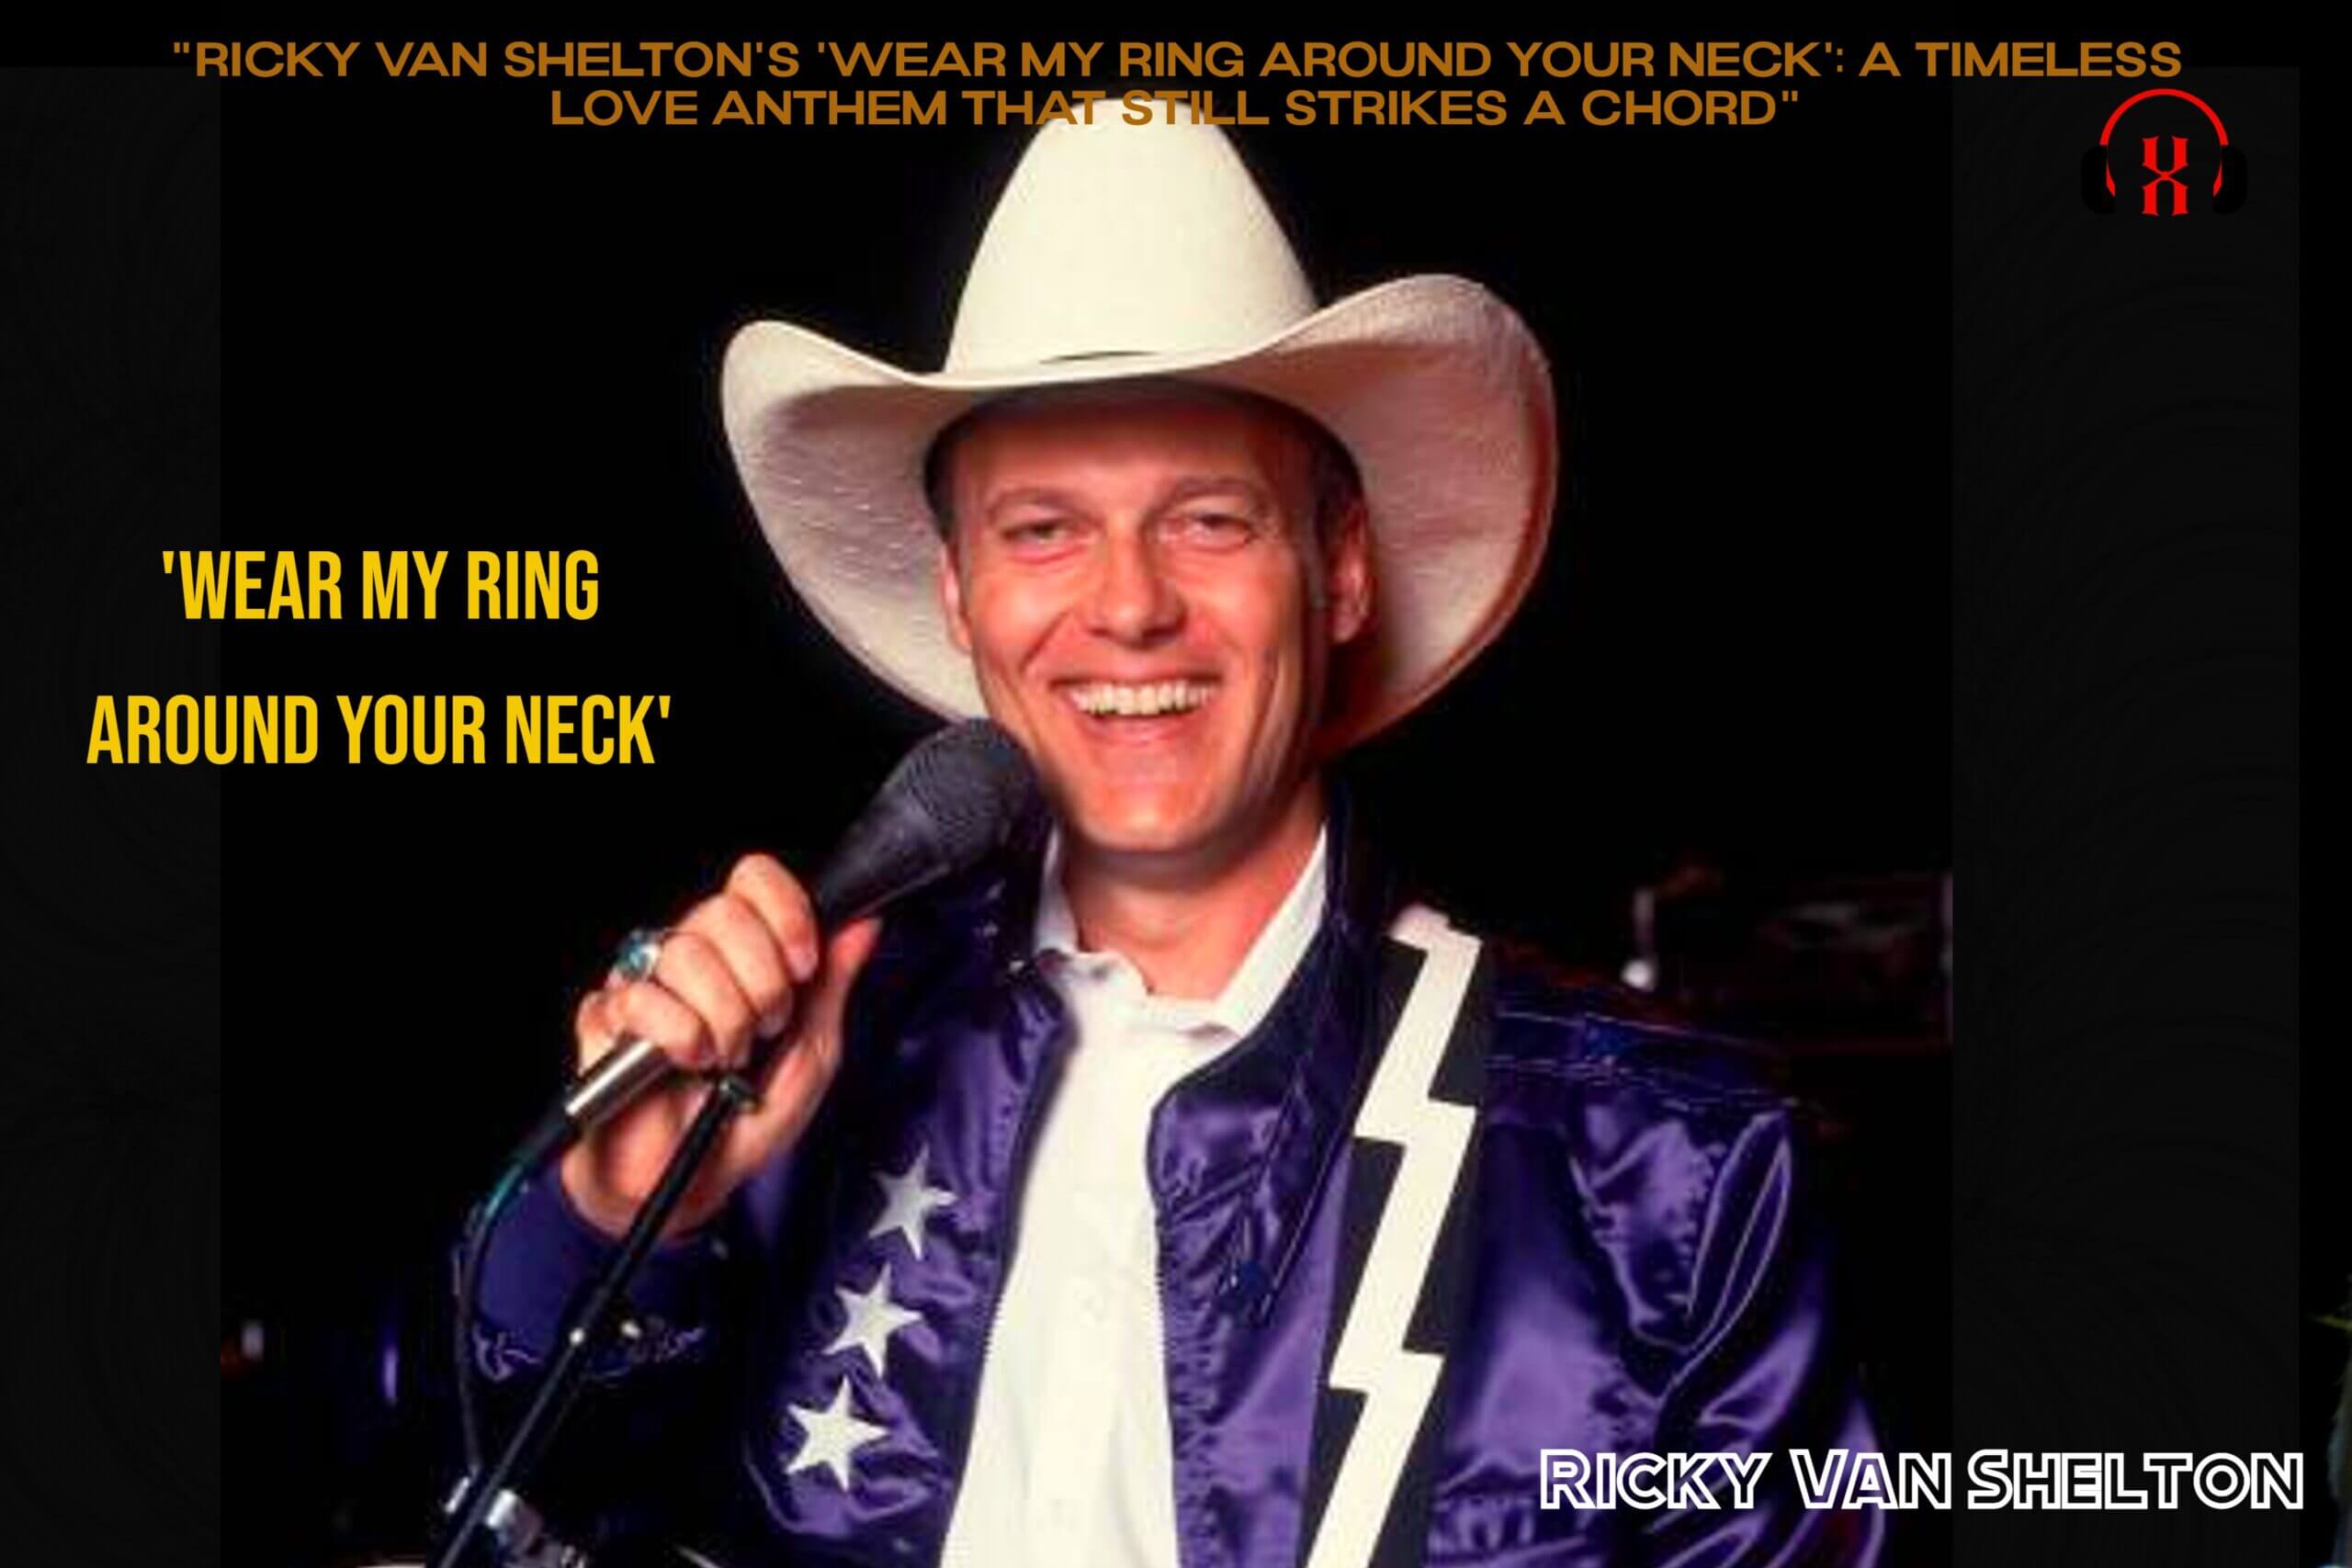 "Ricky Van Shelton's 'Wear My Ring Around Your Neck': A Timeless Love Anthem That Still Strikes a Chord"